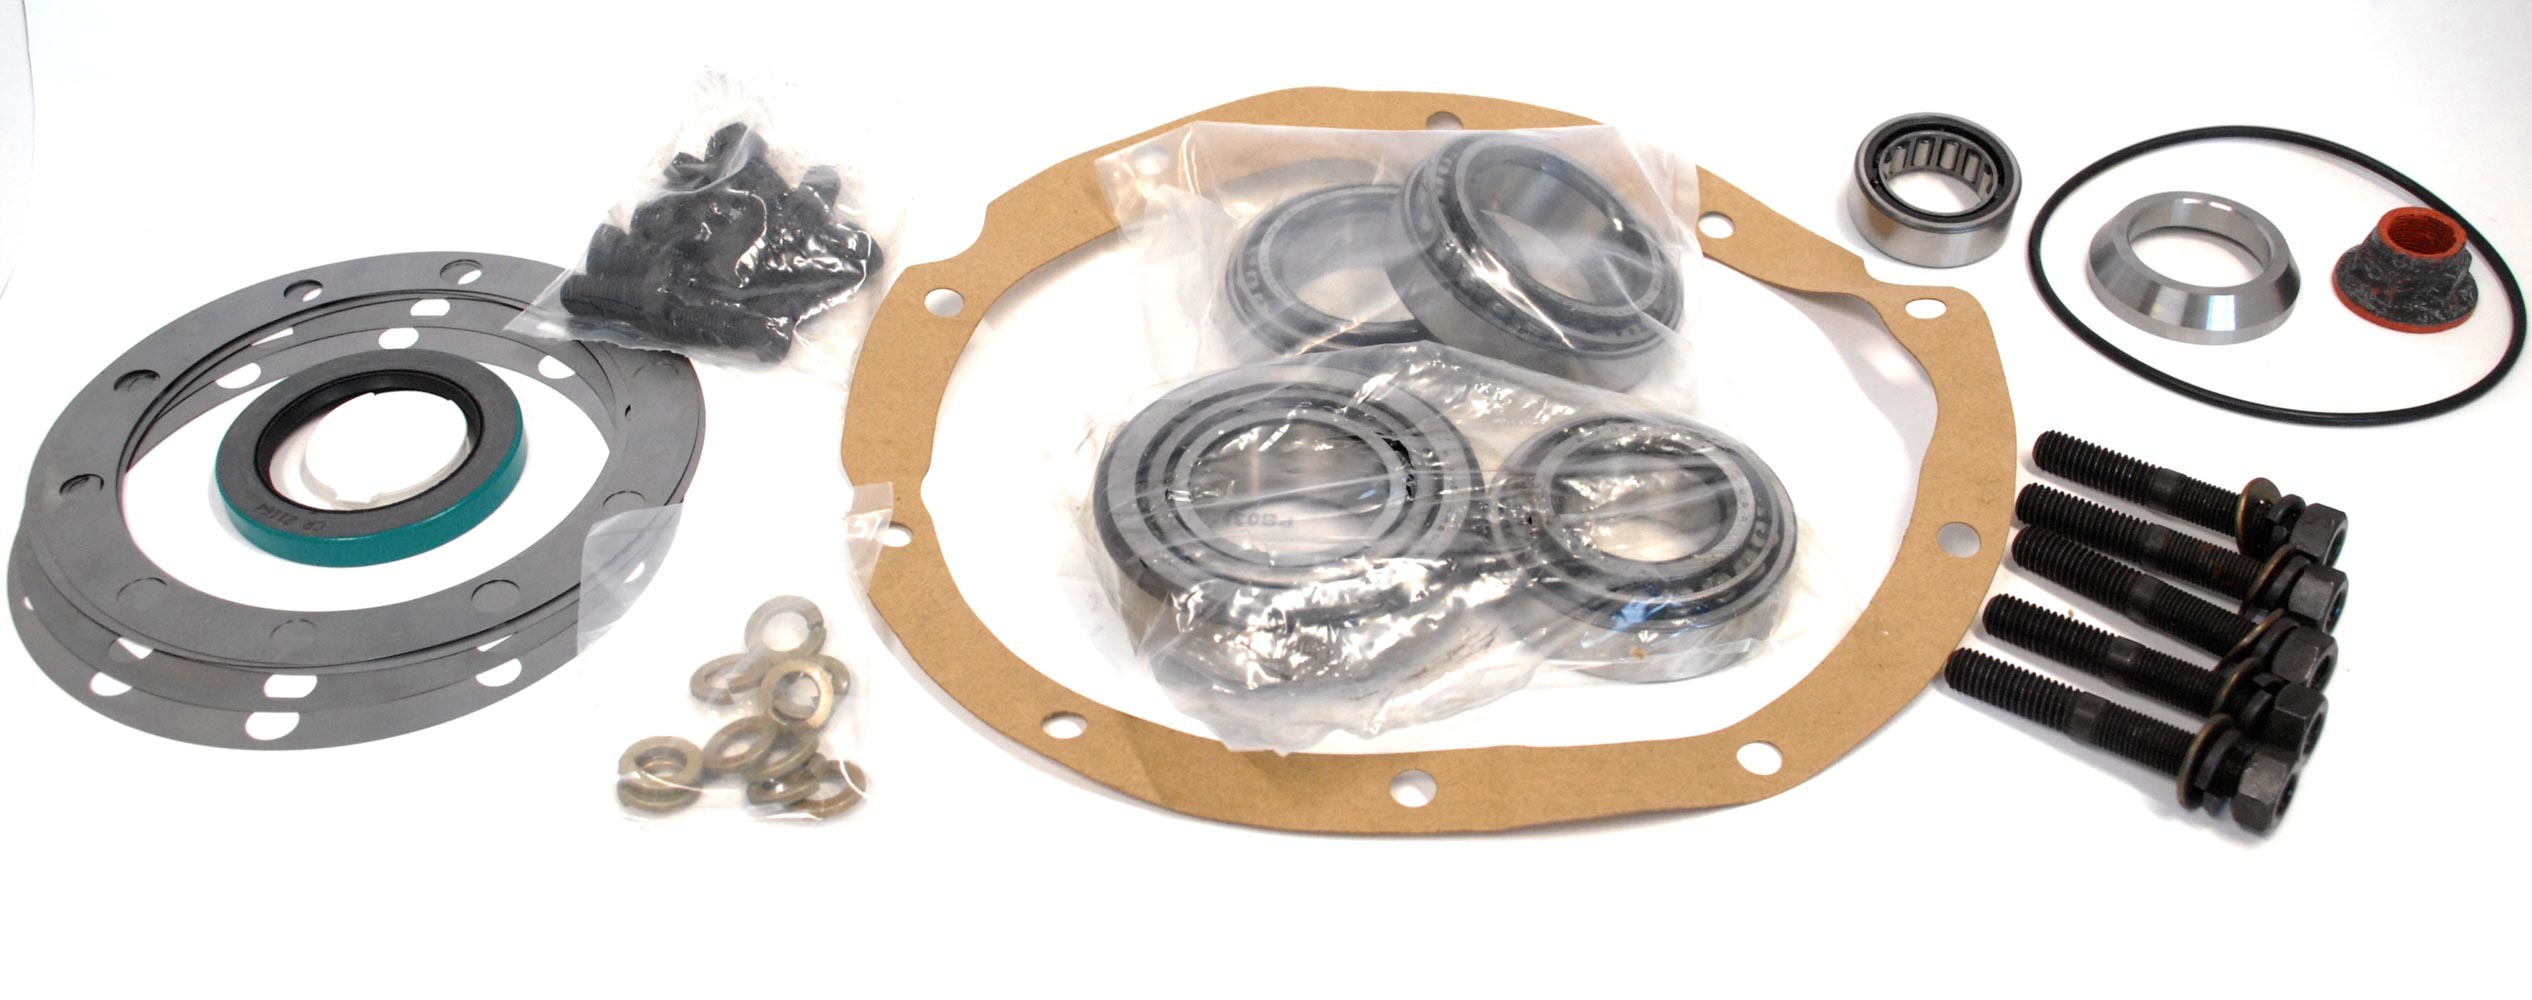 Moser Engineering R9FHP10 - Differential Installation Kit, Bearings / Crush Sleeve / Gaskets / Hardware / Seals / Shims / Thread Locker, 3.812 in Case, Ford 9 in, Kit